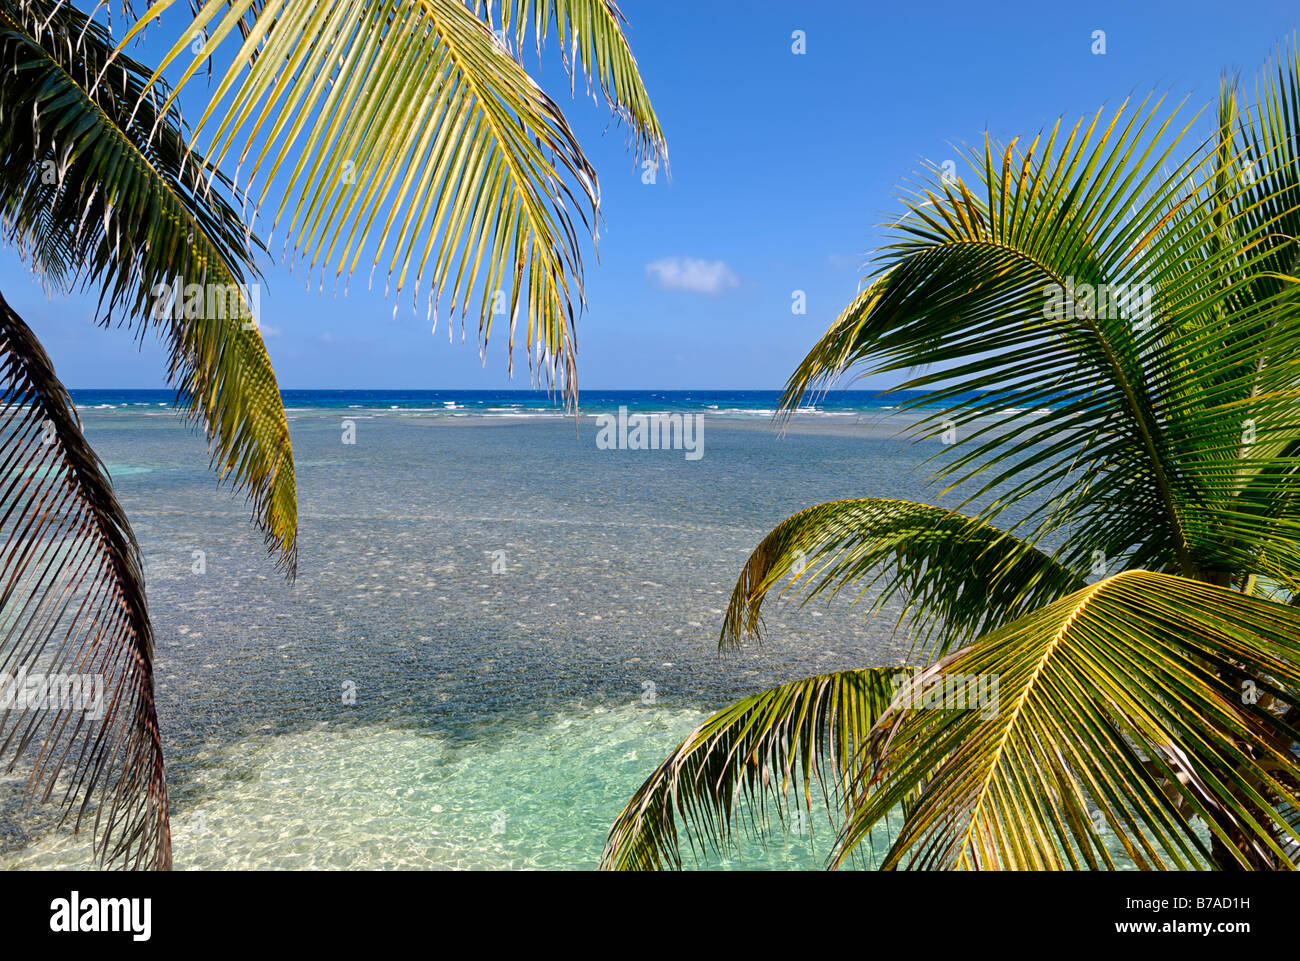 View through palm trees of the shallow water of the South Water Caye coral reef, Caribbean Sea, Belize, Central America Stock Photo